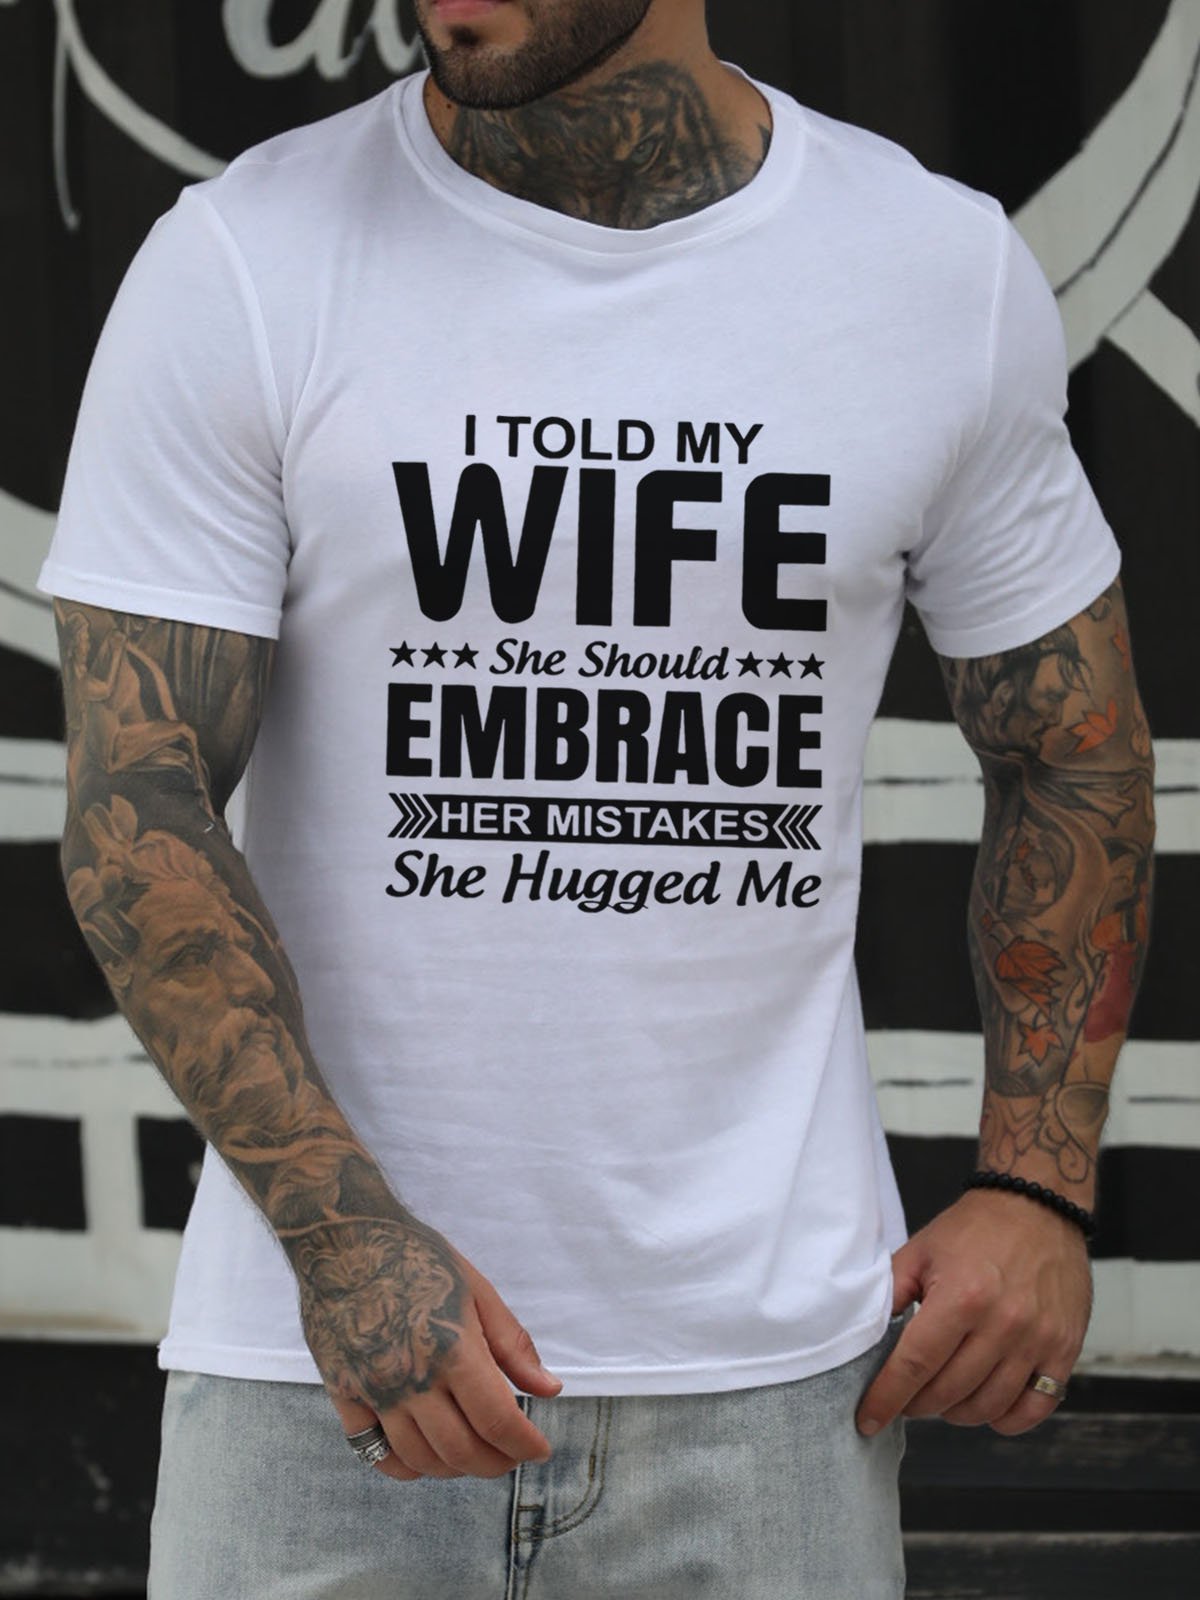 I Told My Wife She Should Embrace Her Mistakes She Hugged Me Cotton Blends Casual Short Sleeve Letter Shirts & Tops